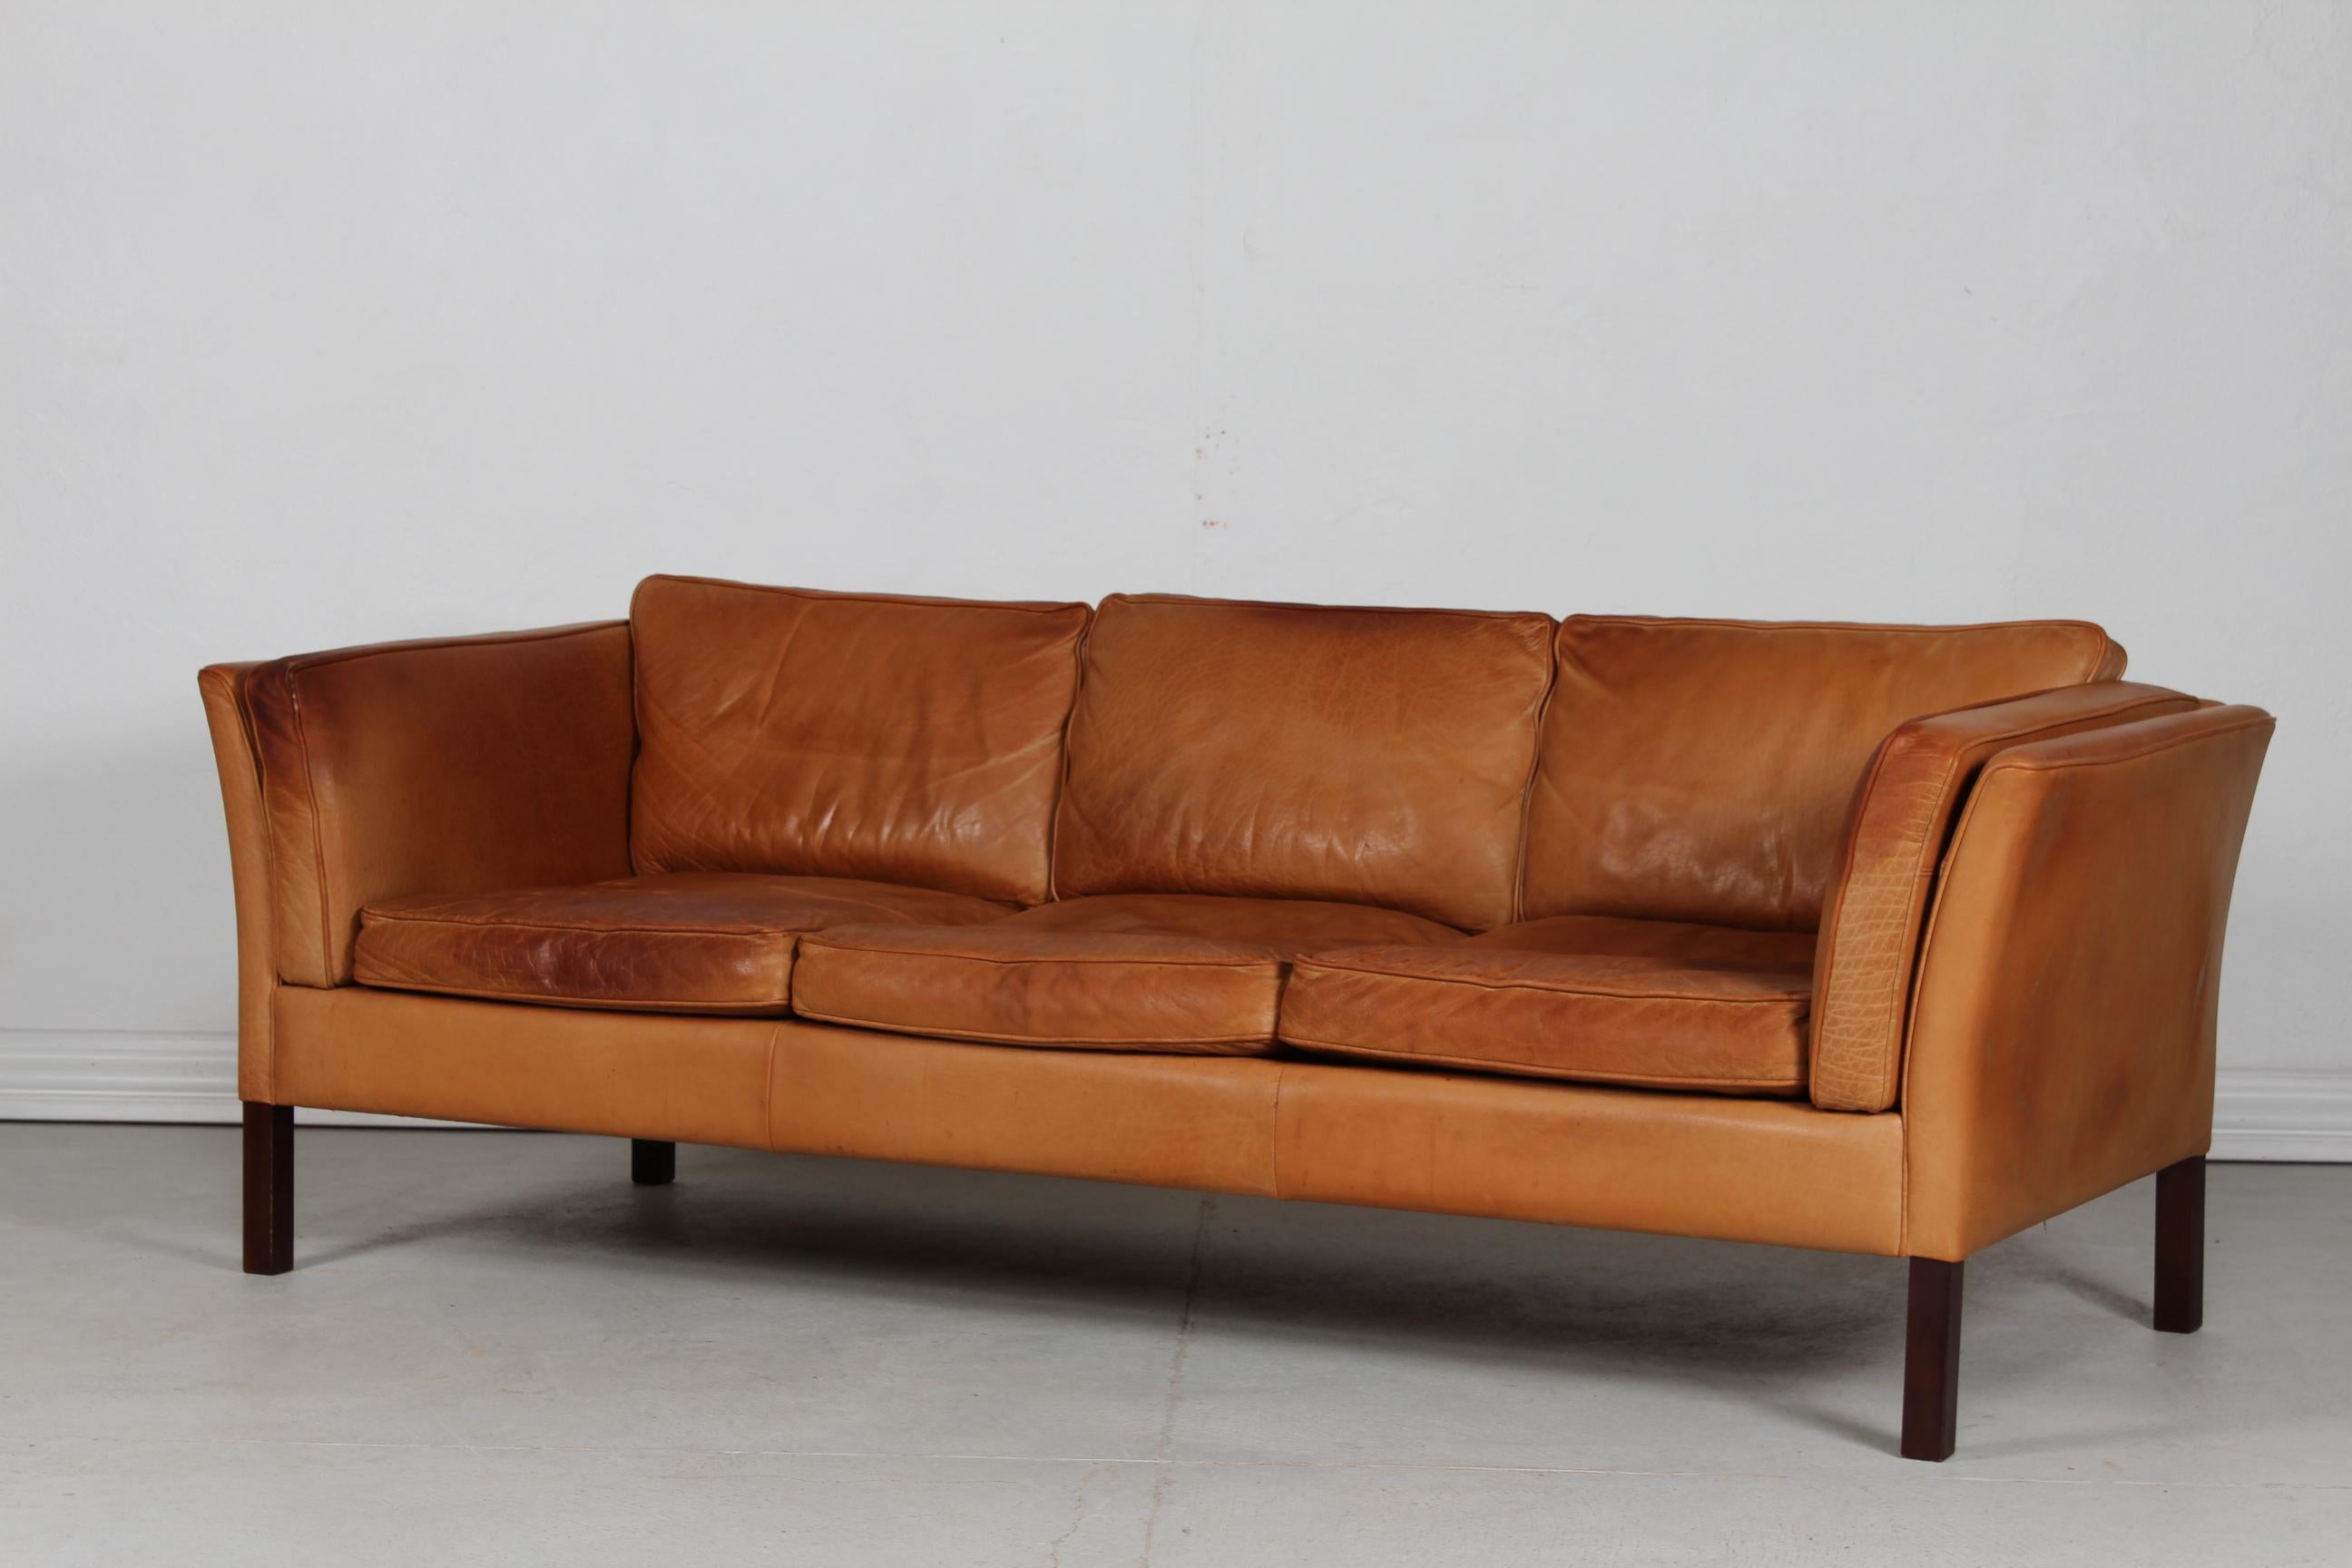 Danish Modern 3-Seat Sofa with Patinated Cognac-Colored Leather 1970s by Stouby In Good Condition In Aarhus C, DK